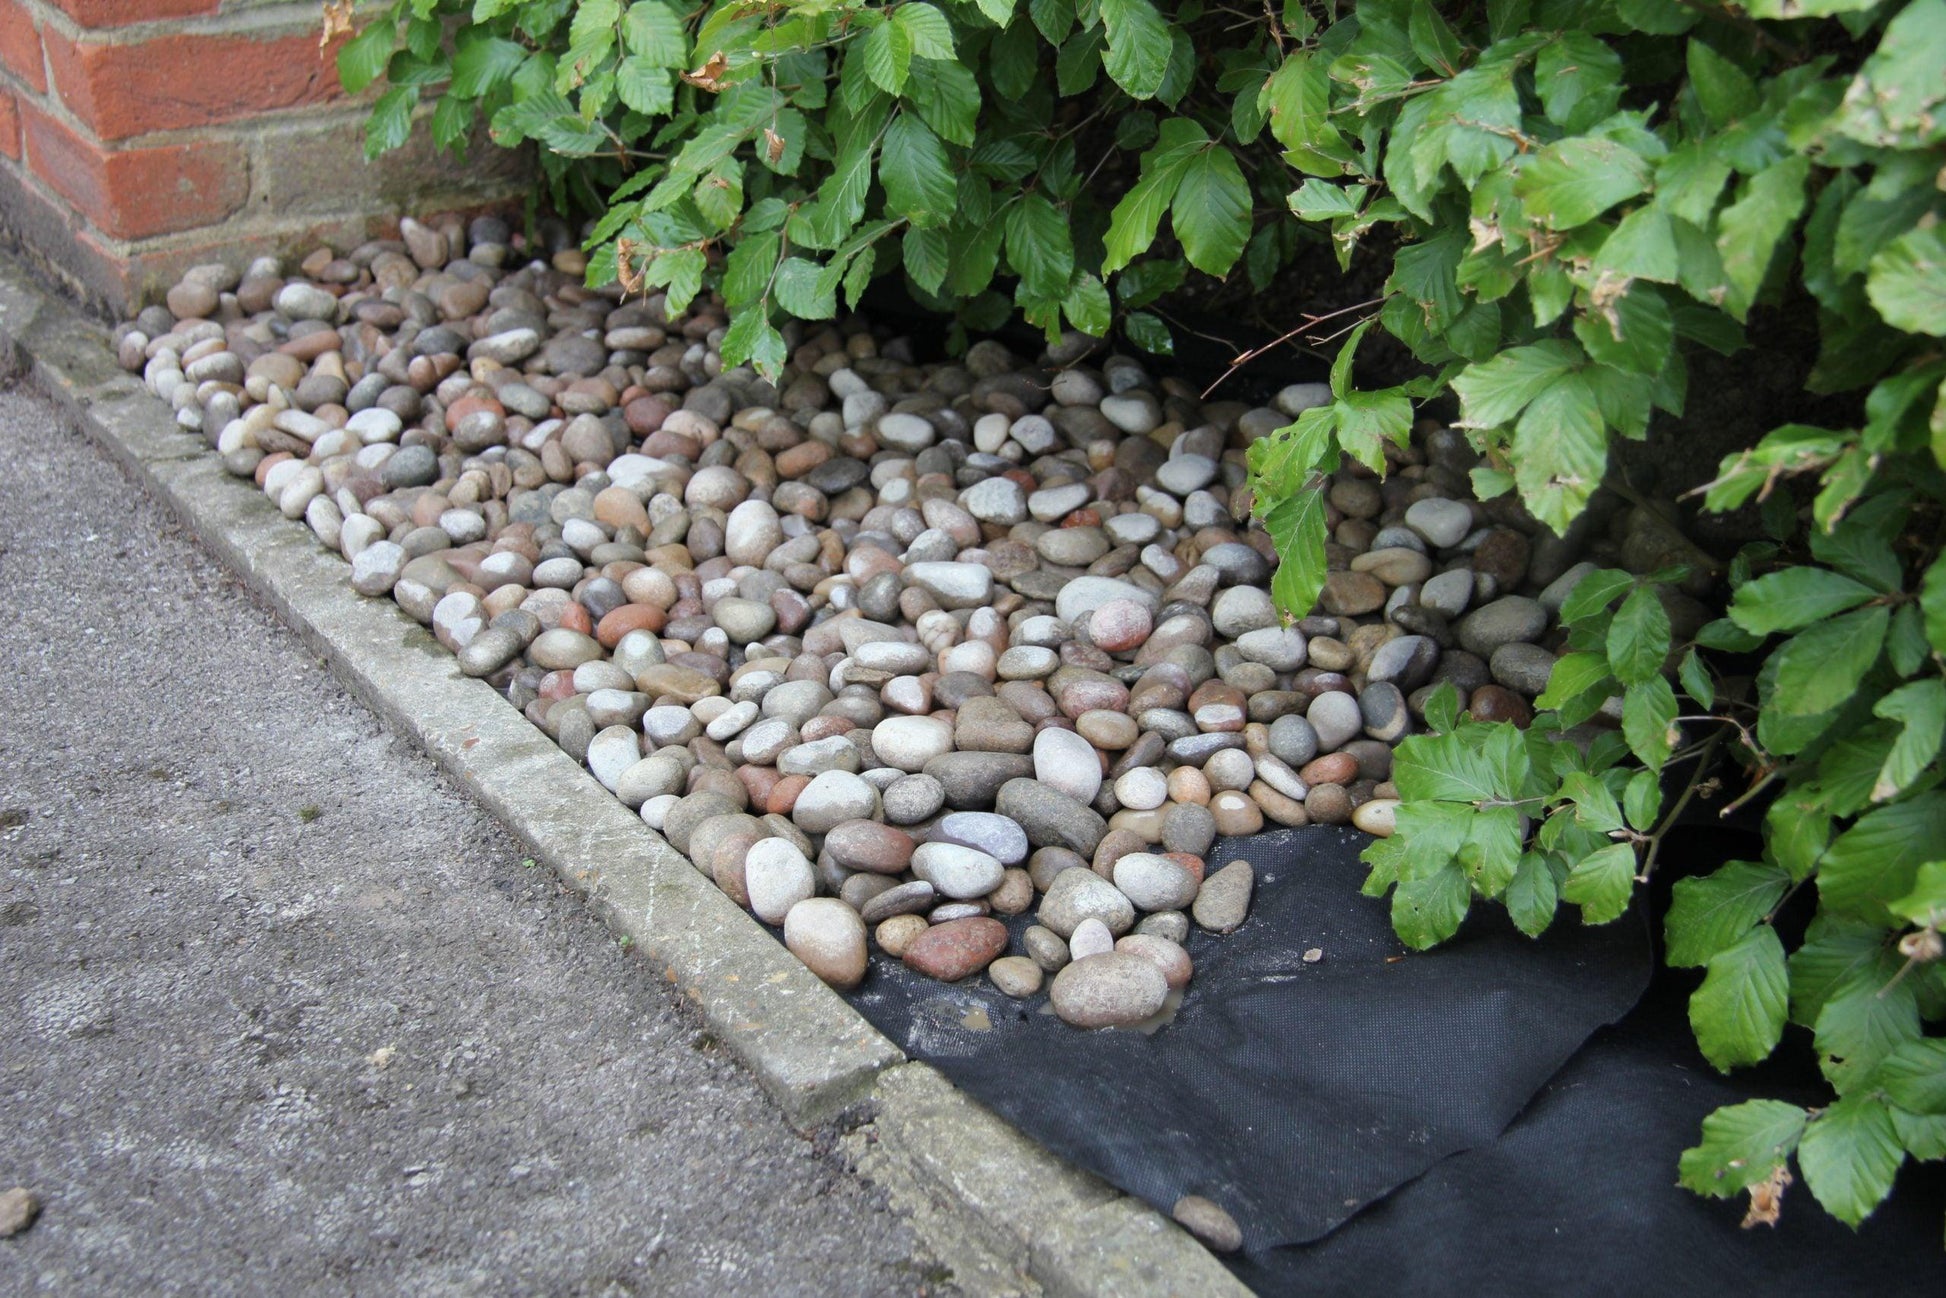 A small garden bed along a brick wall, filled with smooth pebbles and partially bordered by a concrete path. Green leafy plants overhang the pebbles, some placed on Brisks LANDTEX Weed Membrane Fabric for effective weed control, providing an eco-friendly weed barrier solution.